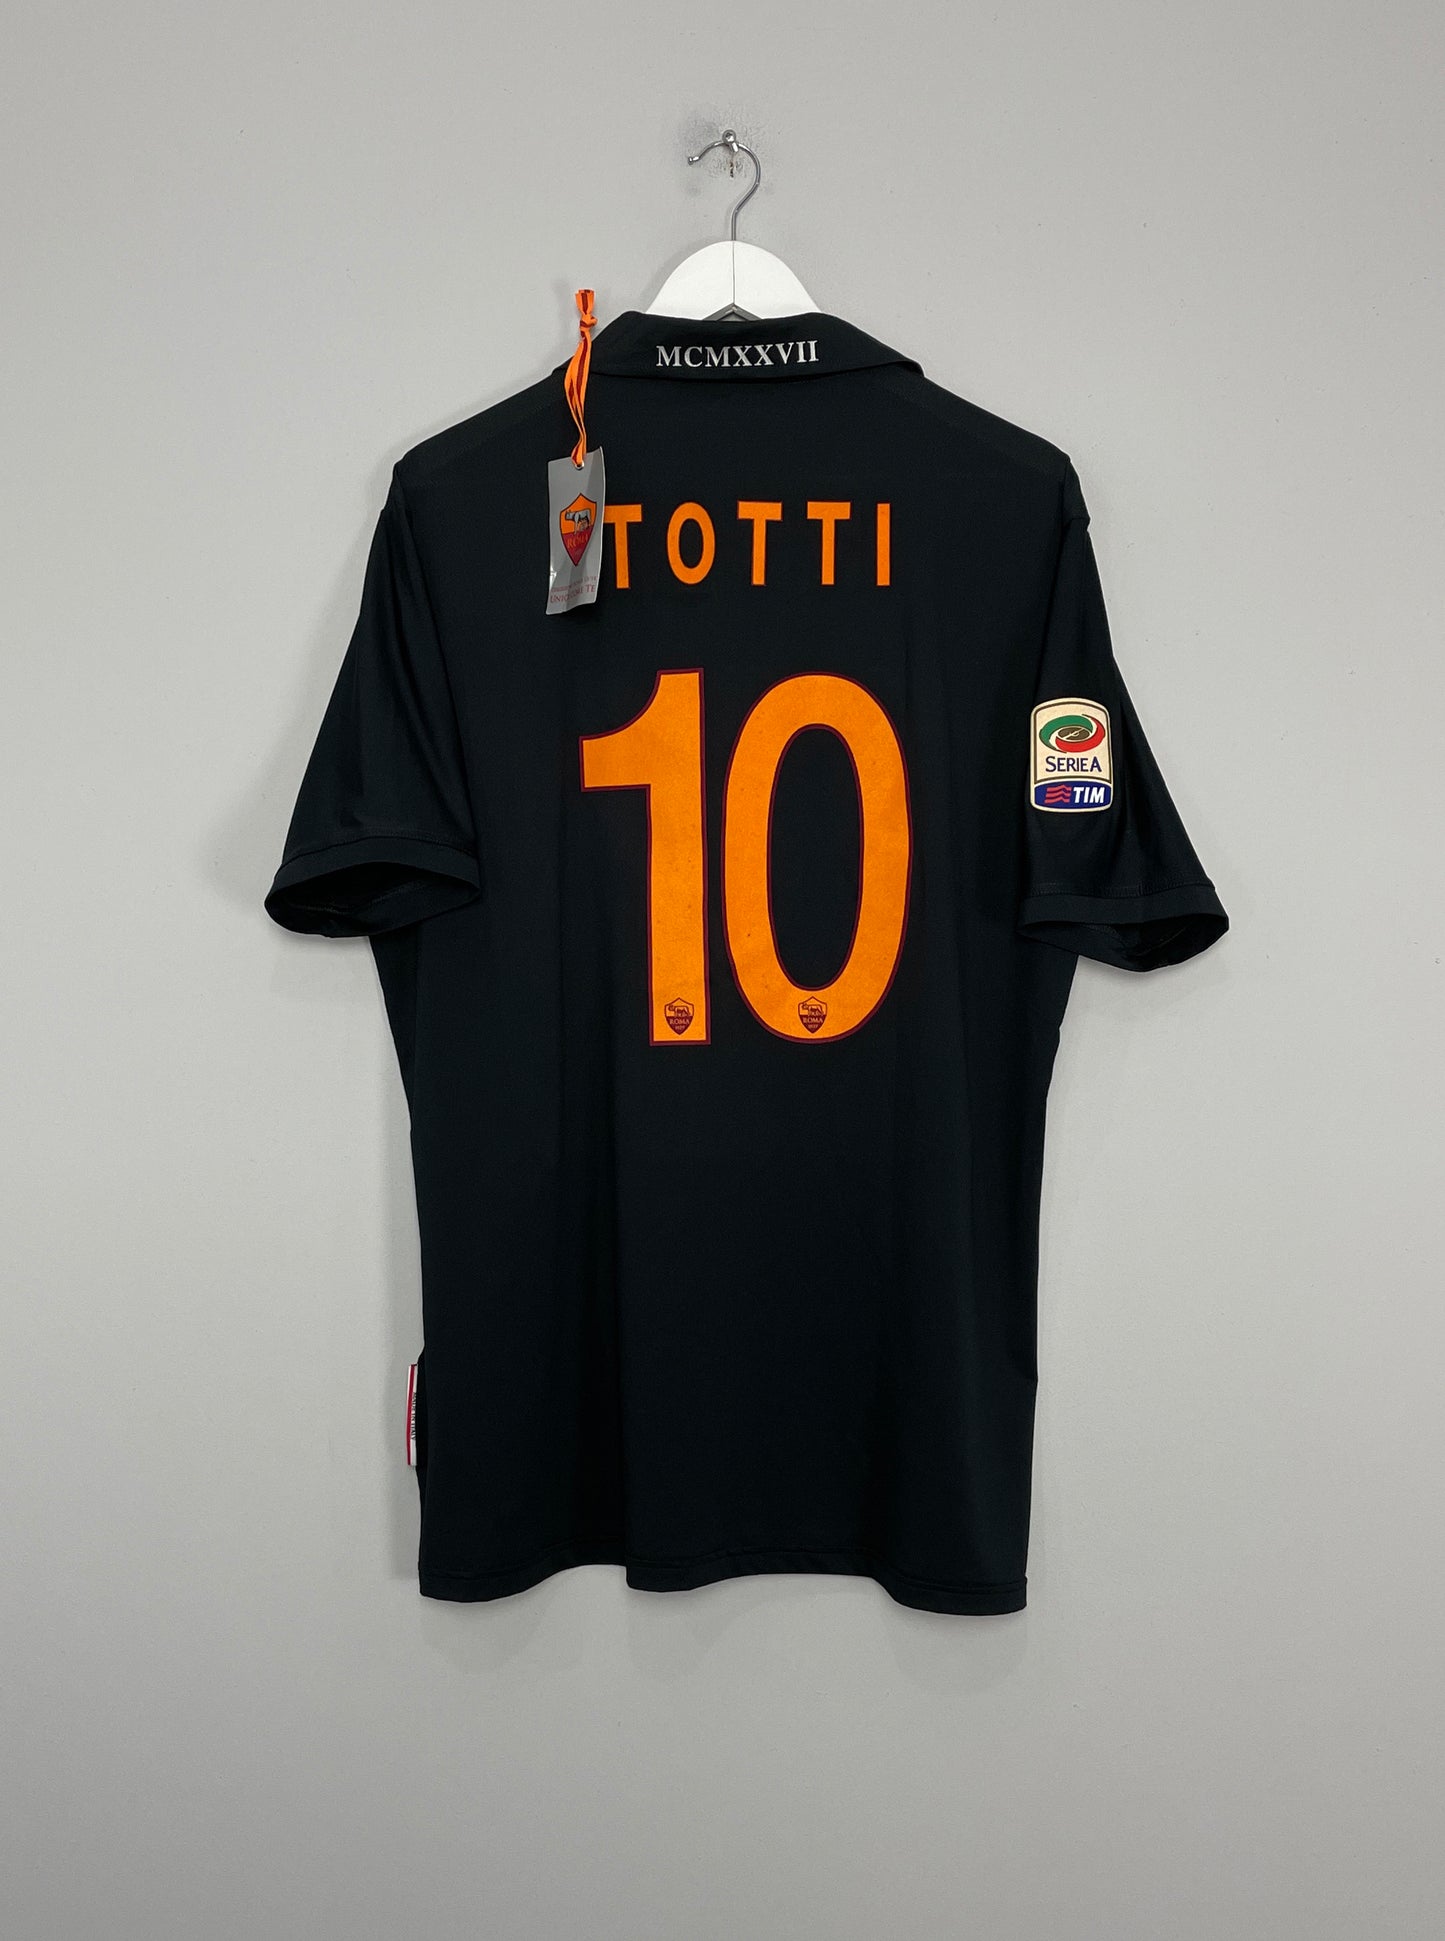 Image of the Roma Totti shirt from the 2013/14 season